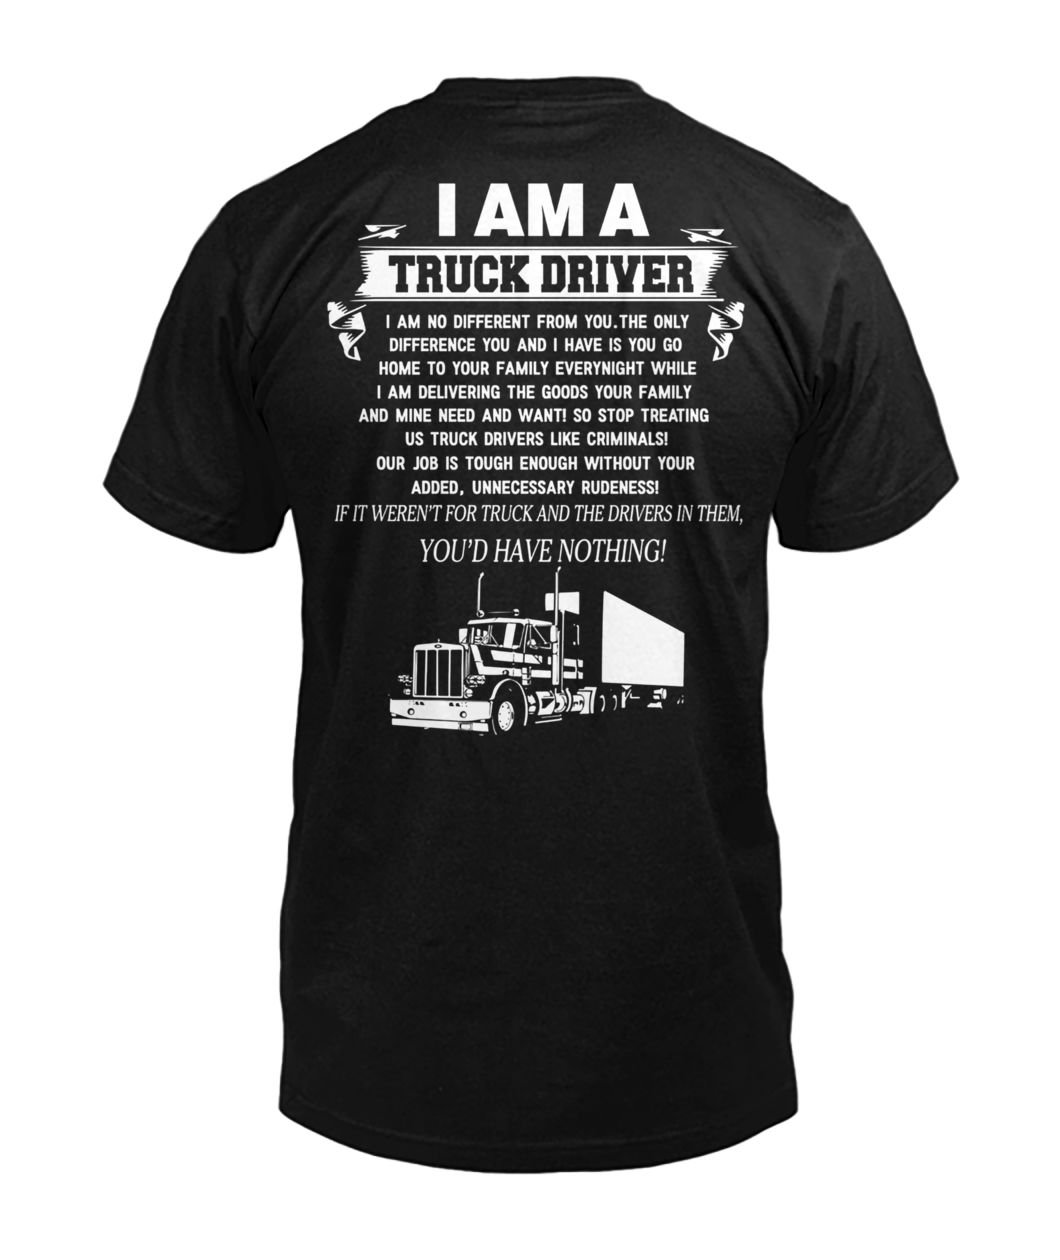 I am a truck driver I am no different from you the only difference you and I have is you go home to your family everynight mens v-neck